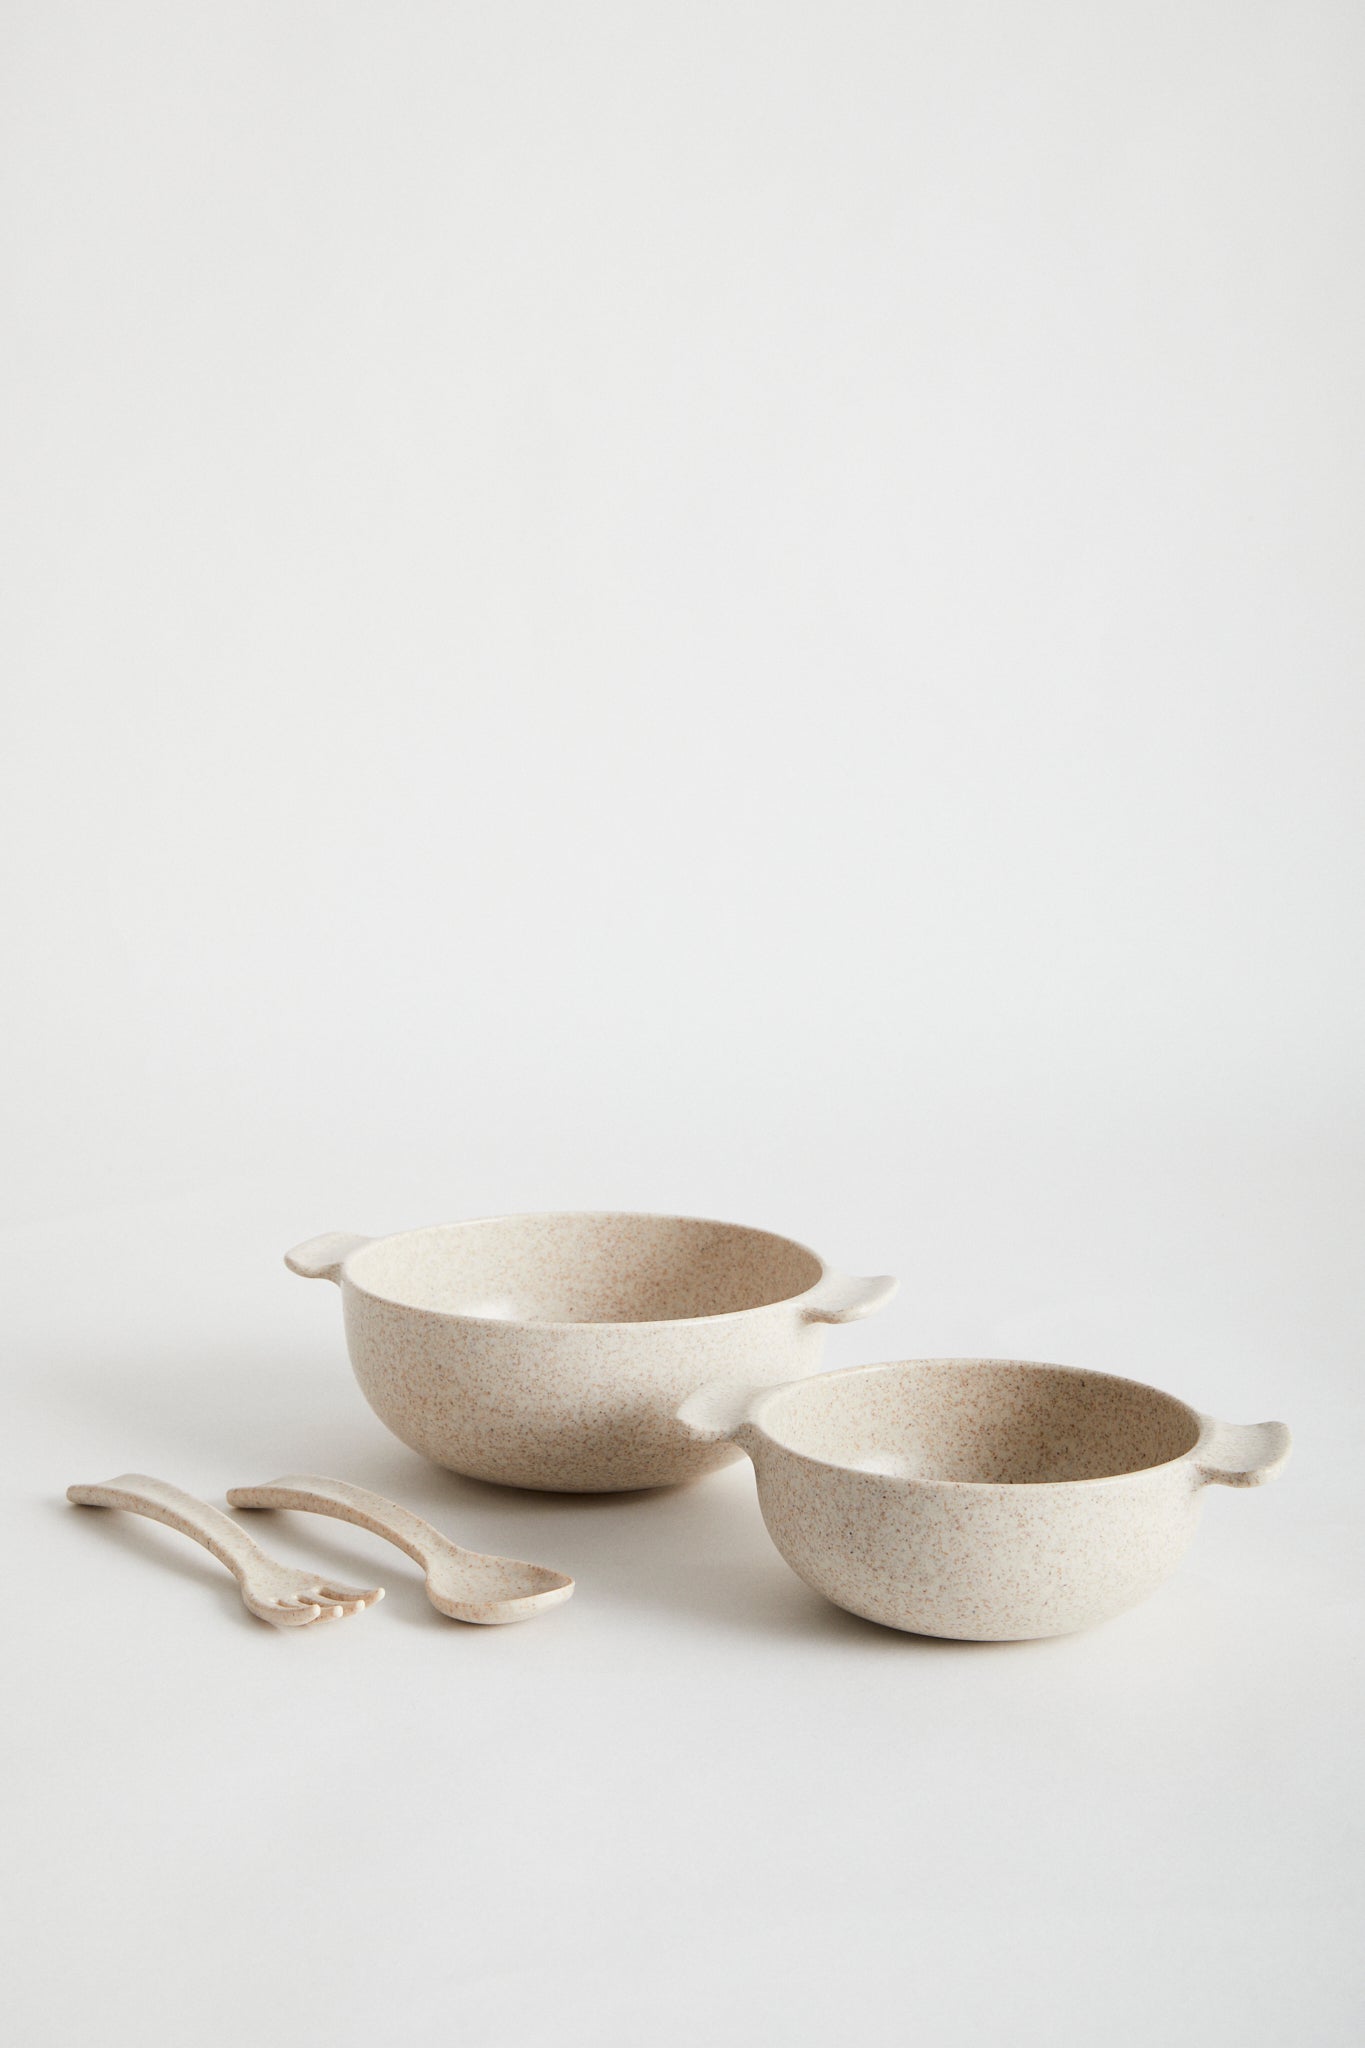 Wheat straw dinnerware set in Oat, -Set contains: 1 x large bowl, 1 x small bowl, 1 x spoon & fork